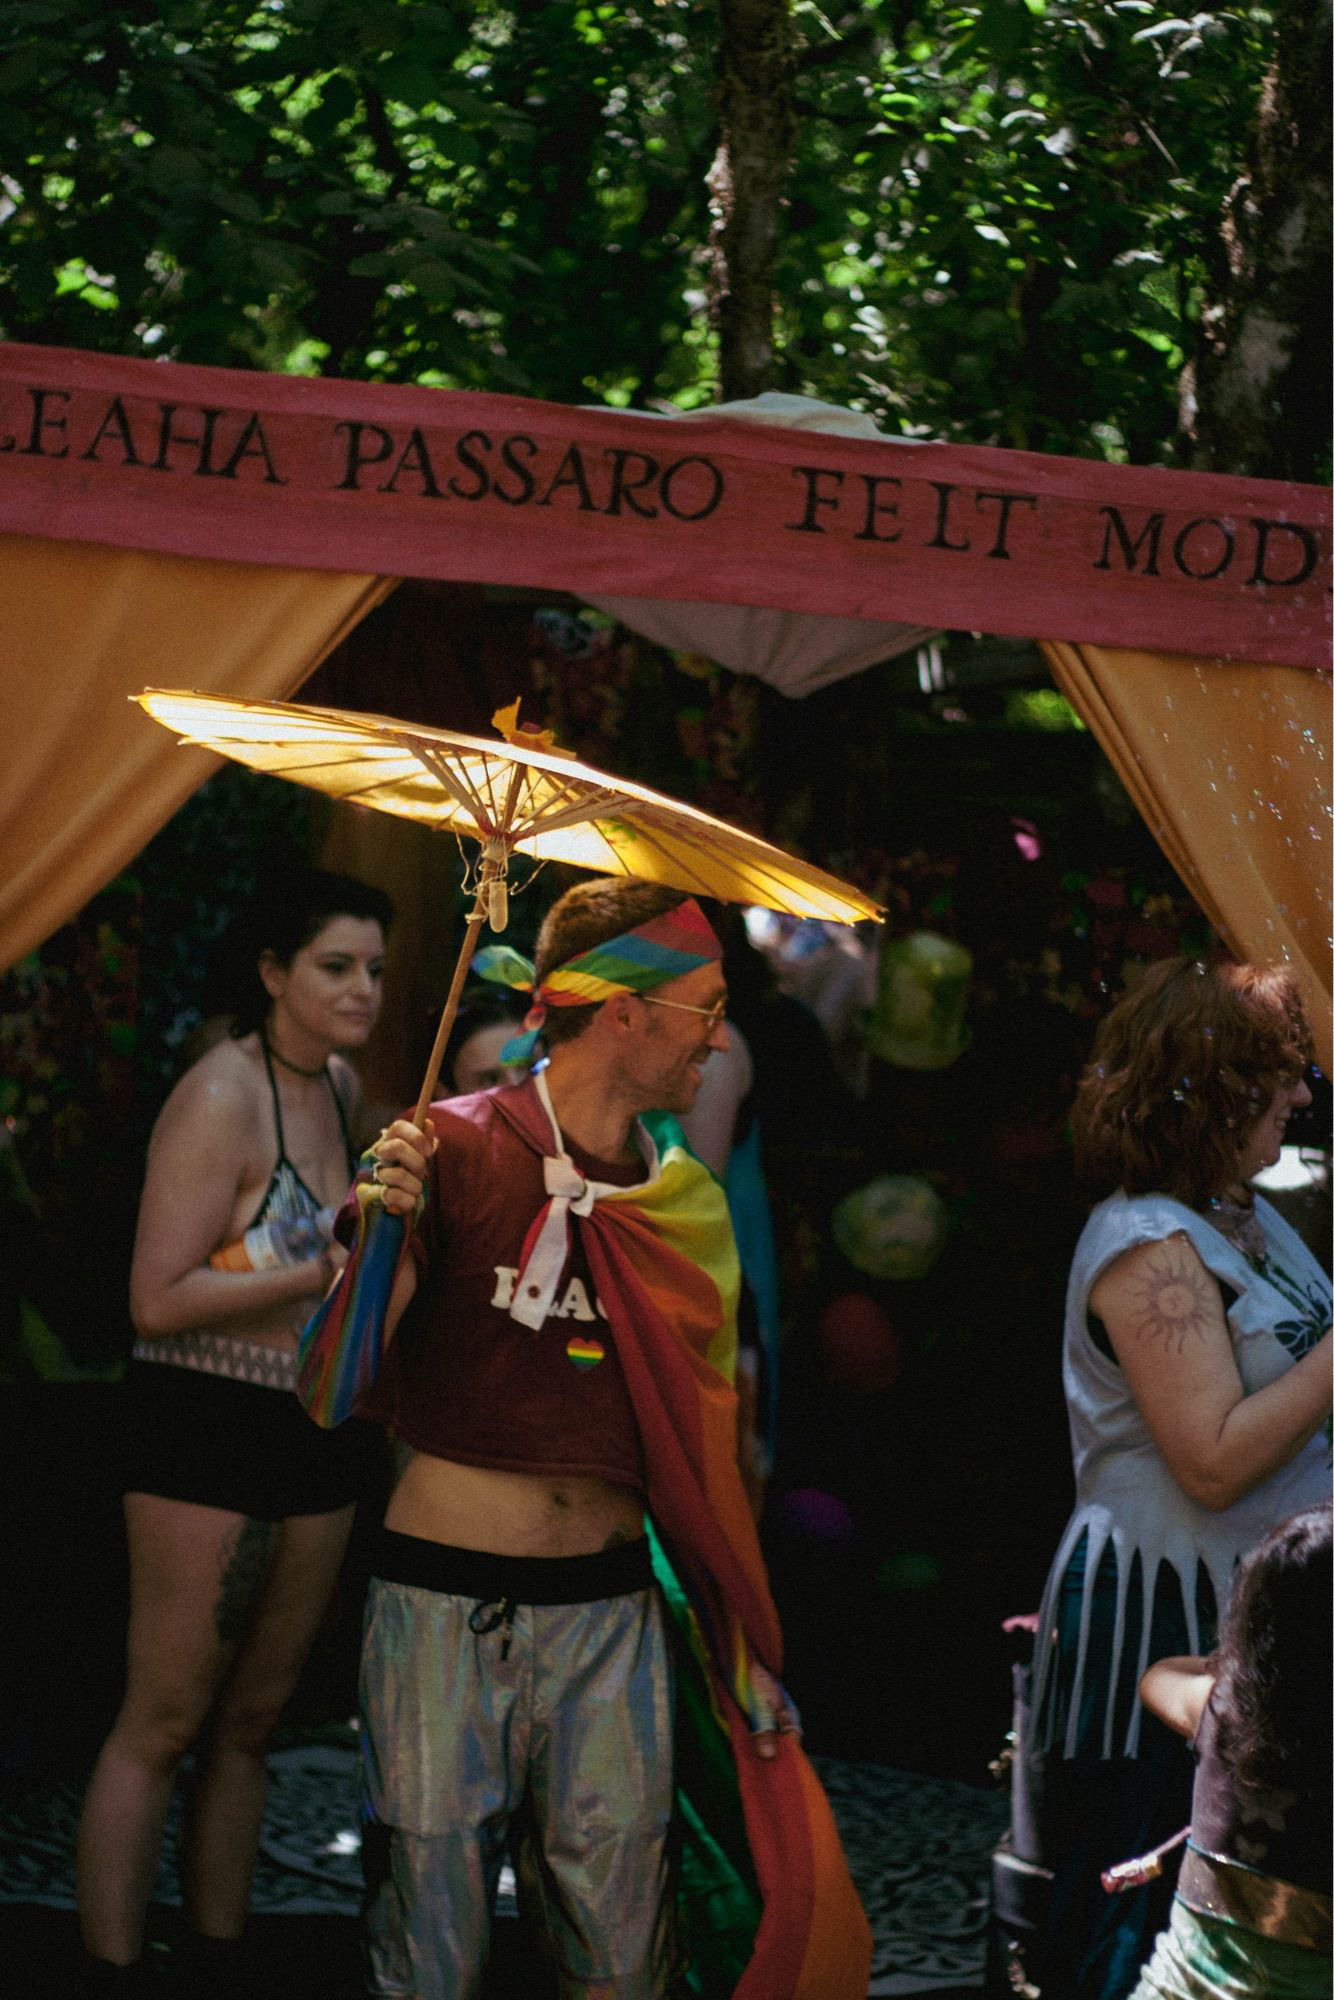 A festival scene with a person holding a yellow parasol and wearing a colorful rainbow outfit. The background includes a booth with a sign reading “Leaha Passaro Felt Mod” and various people enjoying the event.